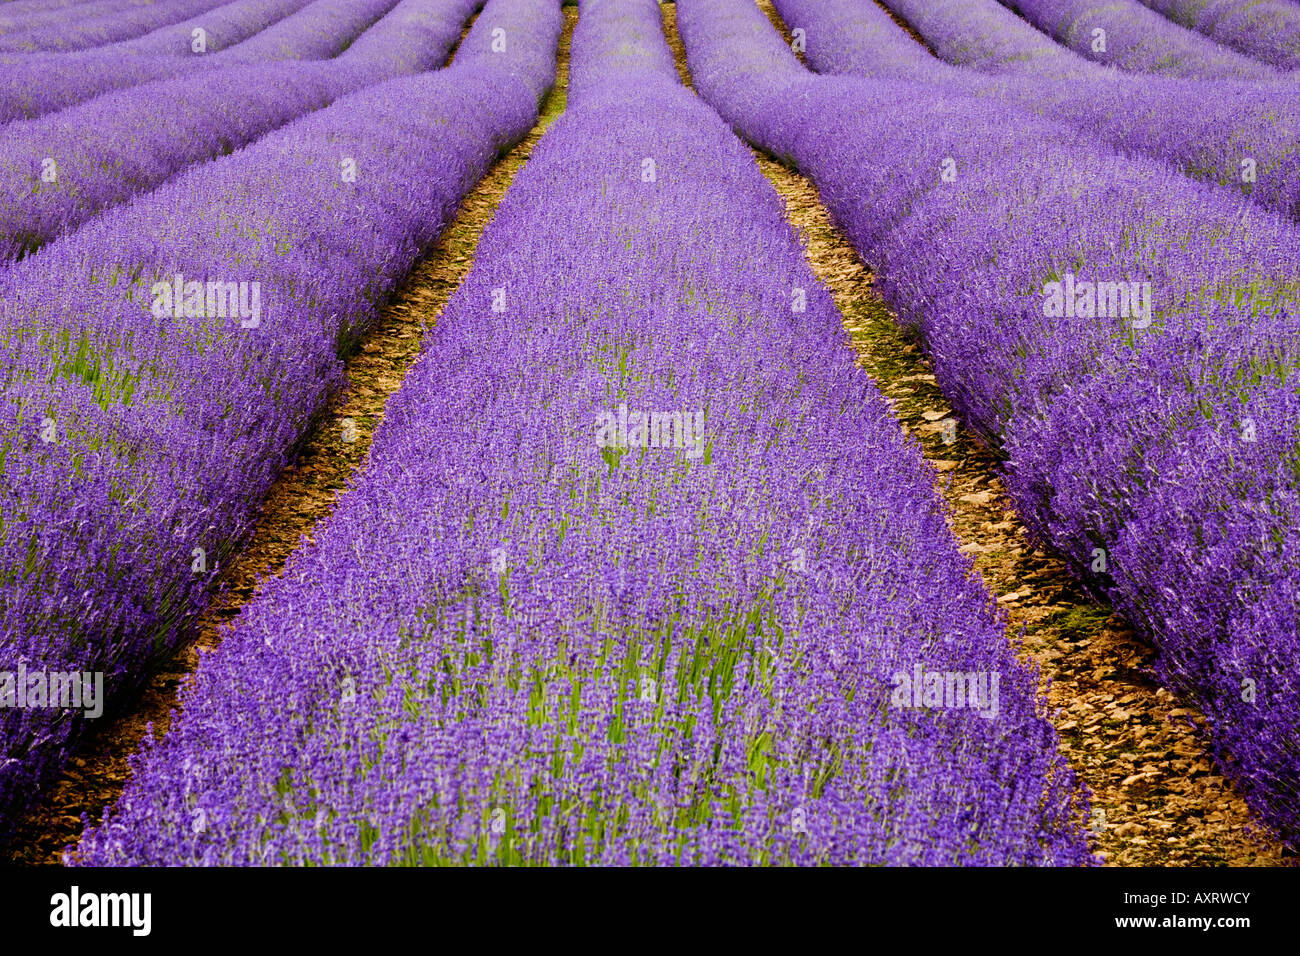 A symetrical shot of Lavender in flower growing in rows, taken in the English Cotswolds Stock Photo